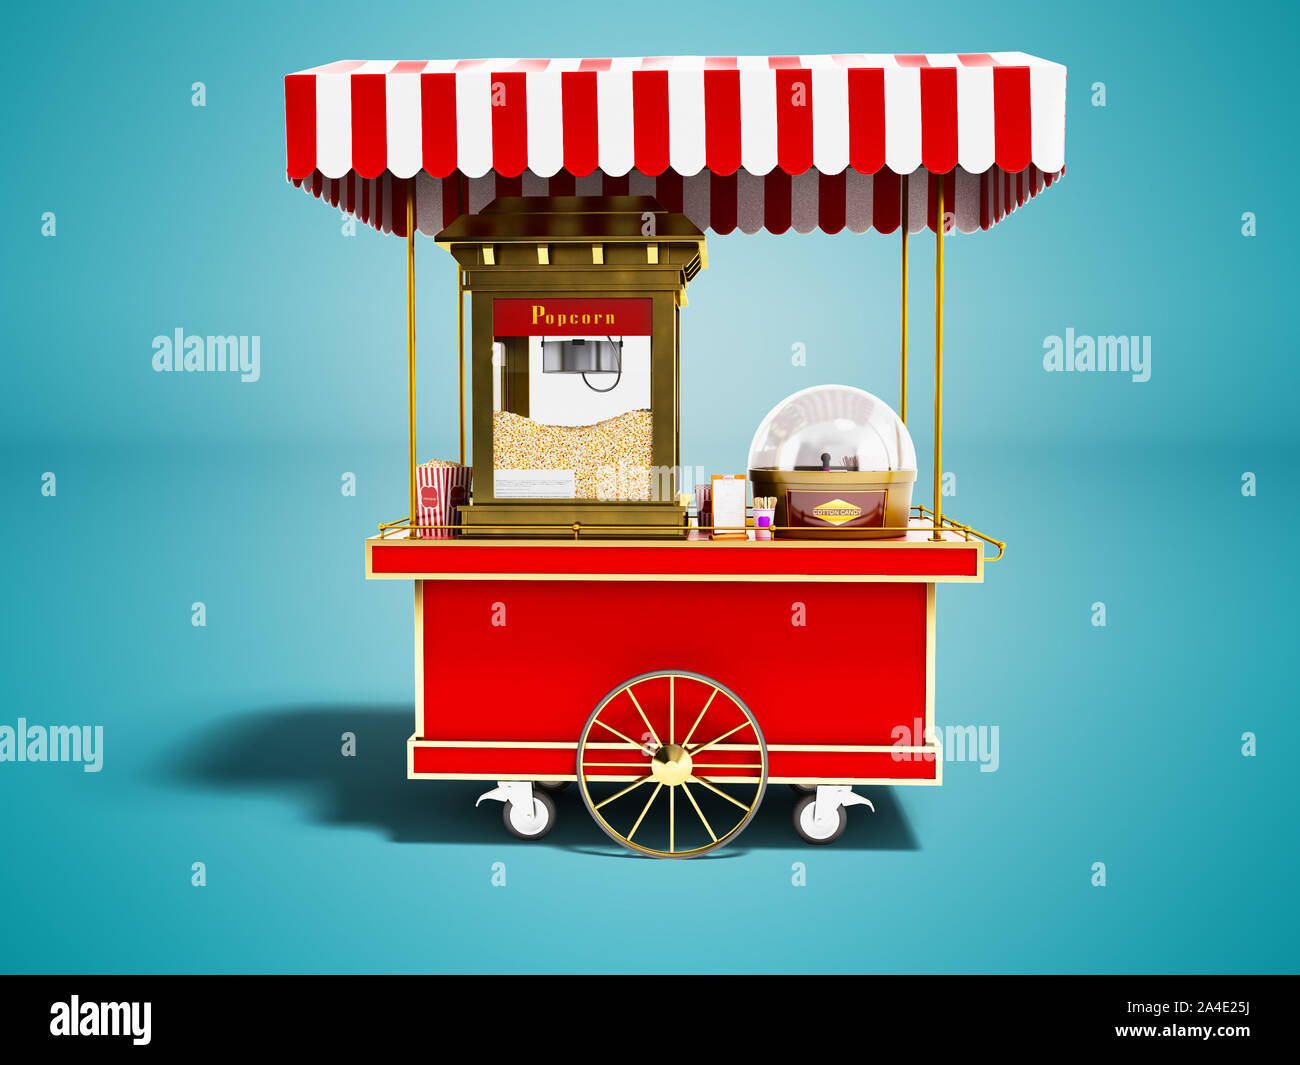 Modern Sale Of Popcorn From A Red Cart 3d Render On Blue Background With Shadow Stock Photo Alamy